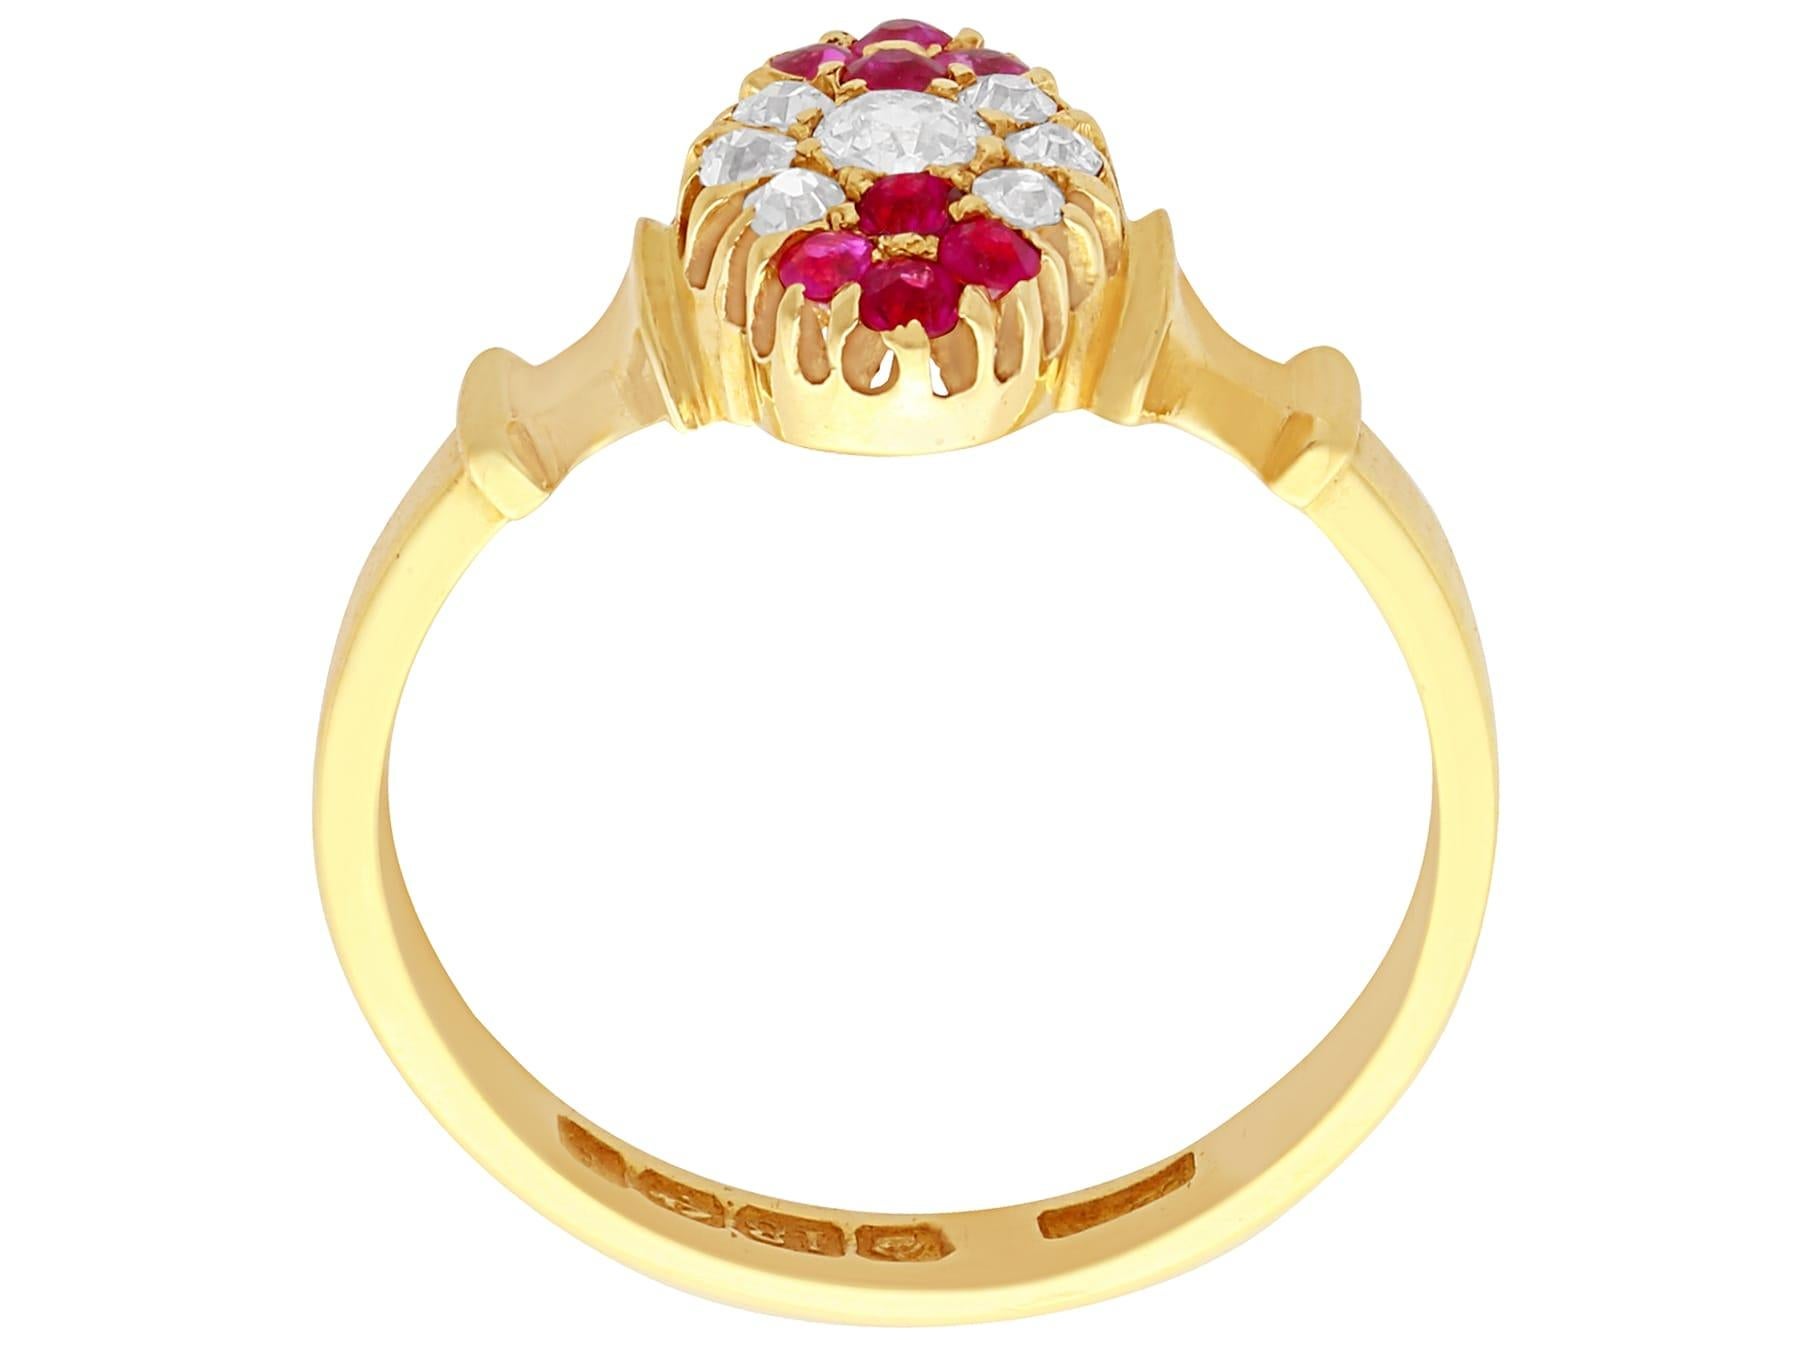 Antique Edwardian 1905 Diamond Ruby Gold Cocktail Ring In Excellent Condition For Sale In Jesmond, Newcastle Upon Tyne